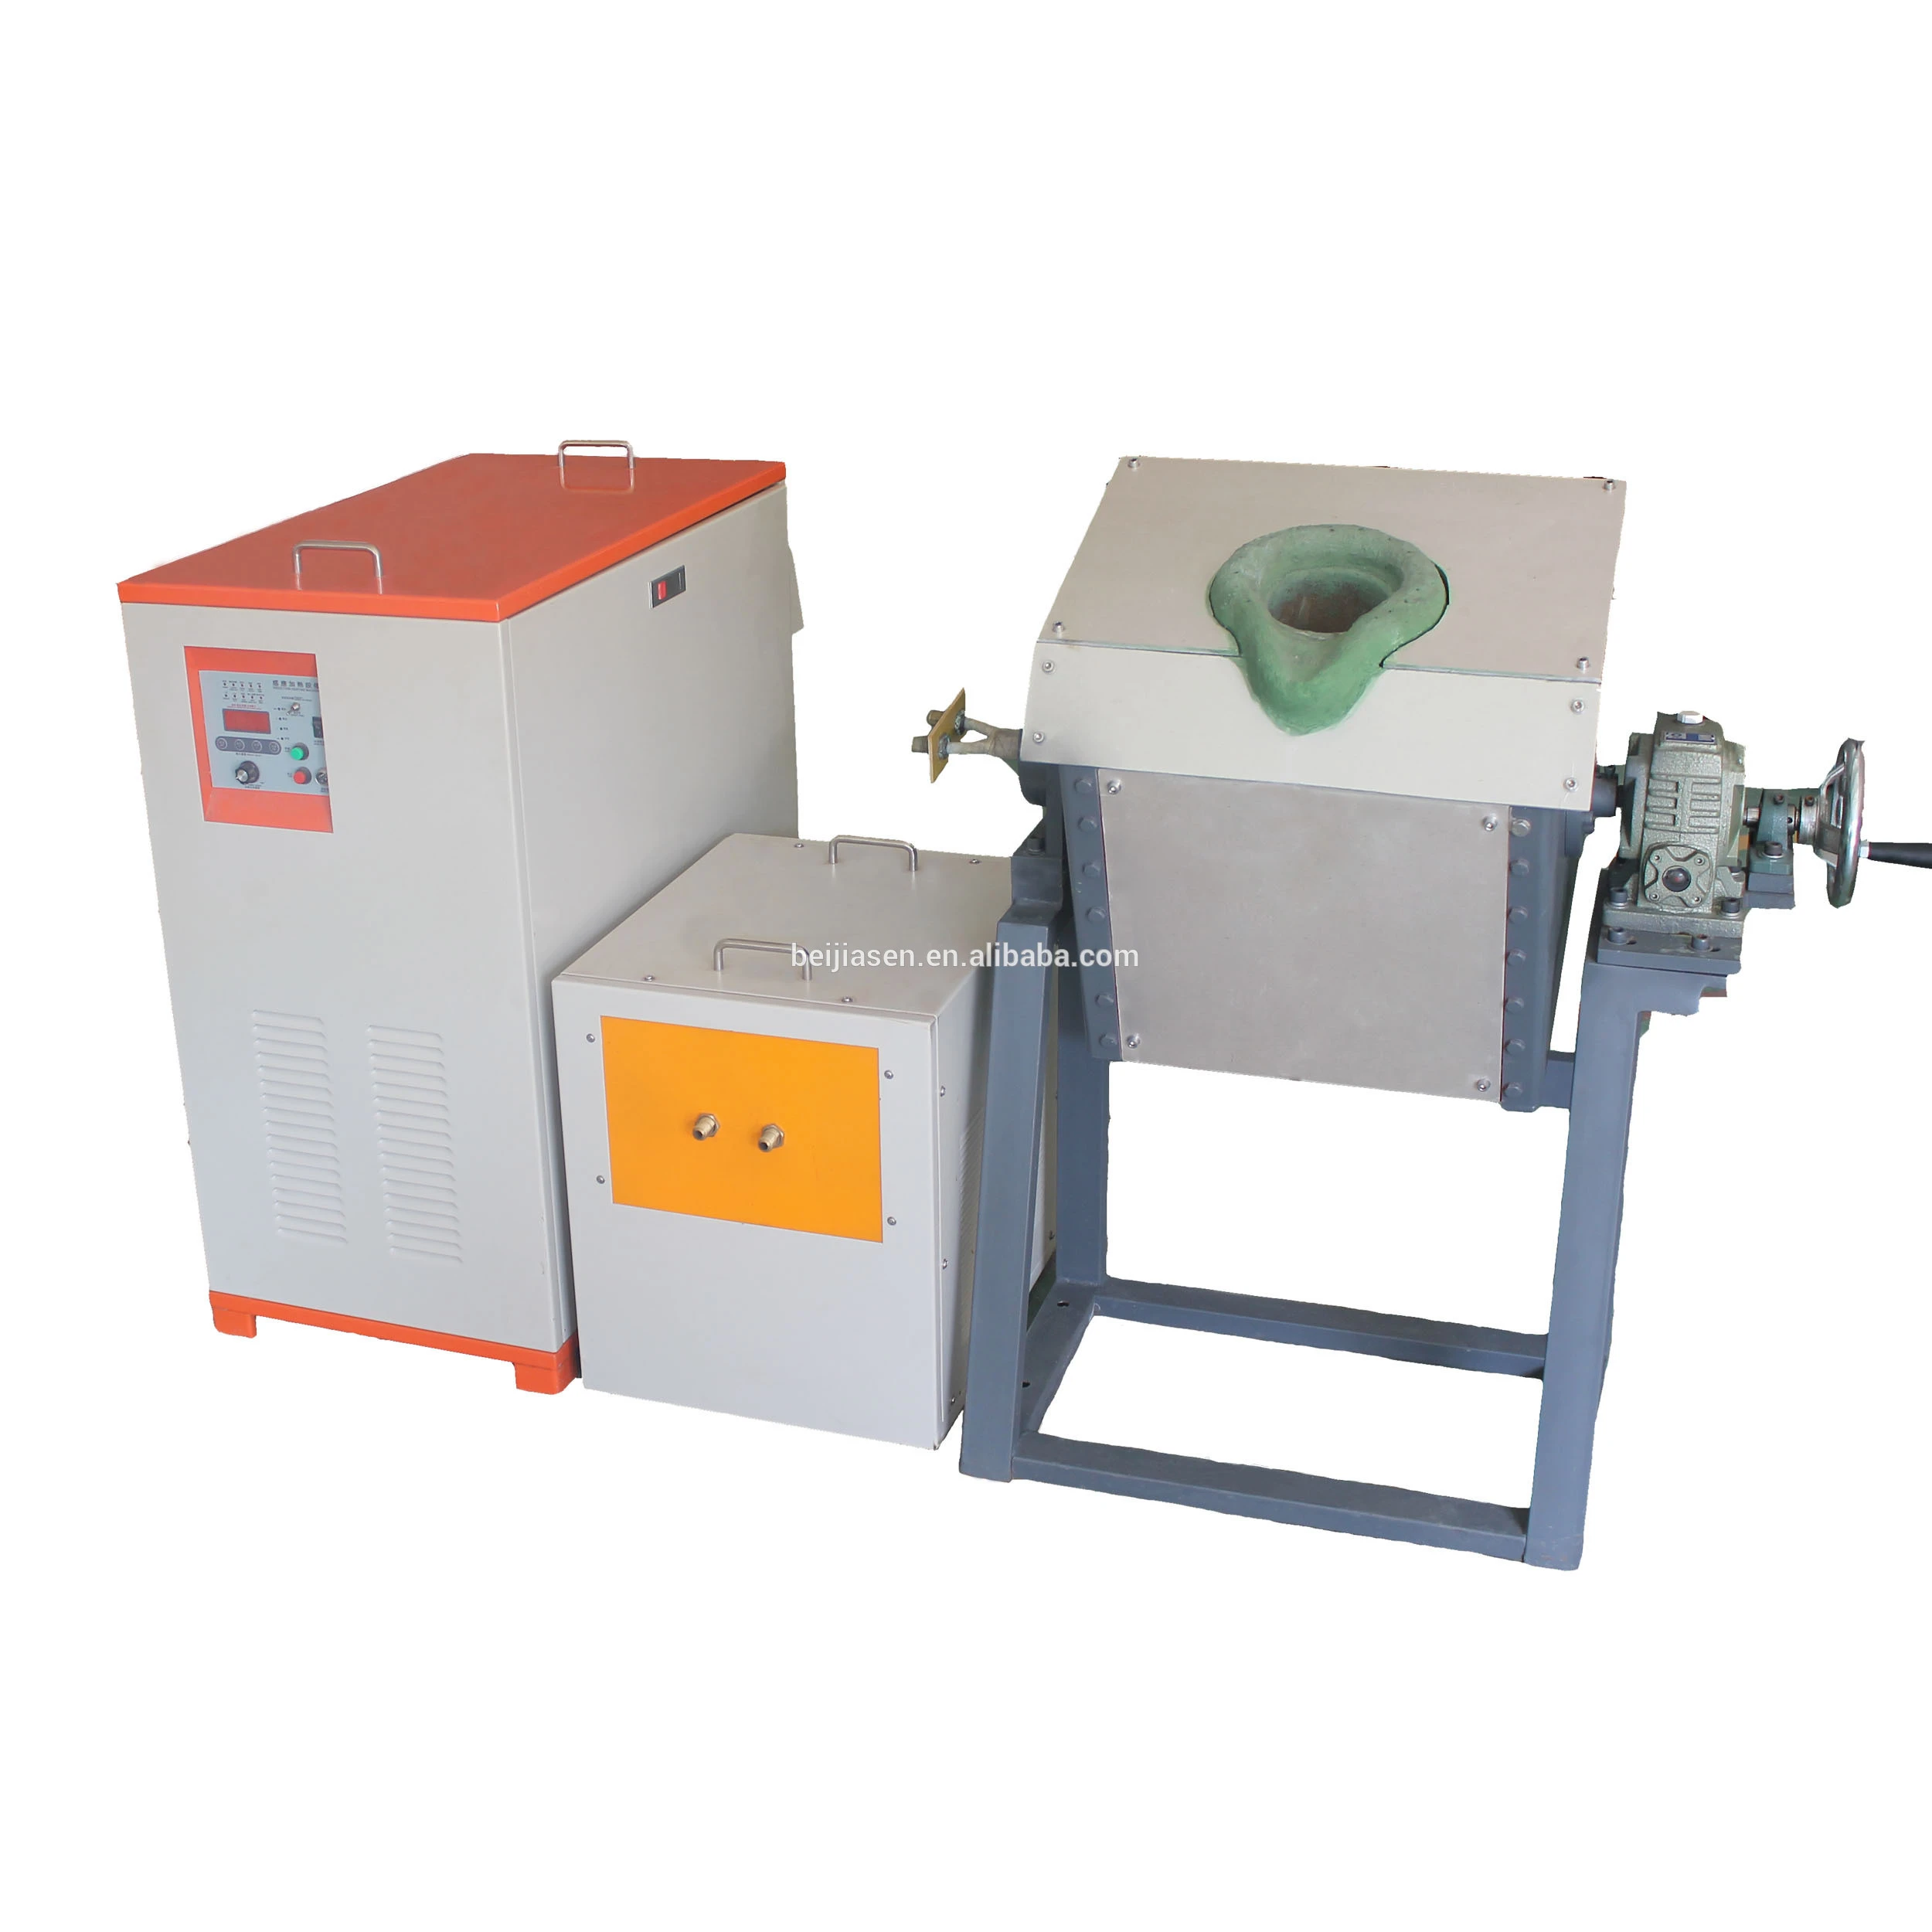 Energy Conservation Price  Iron Copper Steel Lead Metal Scrap Induction Melting Furnace For Gold